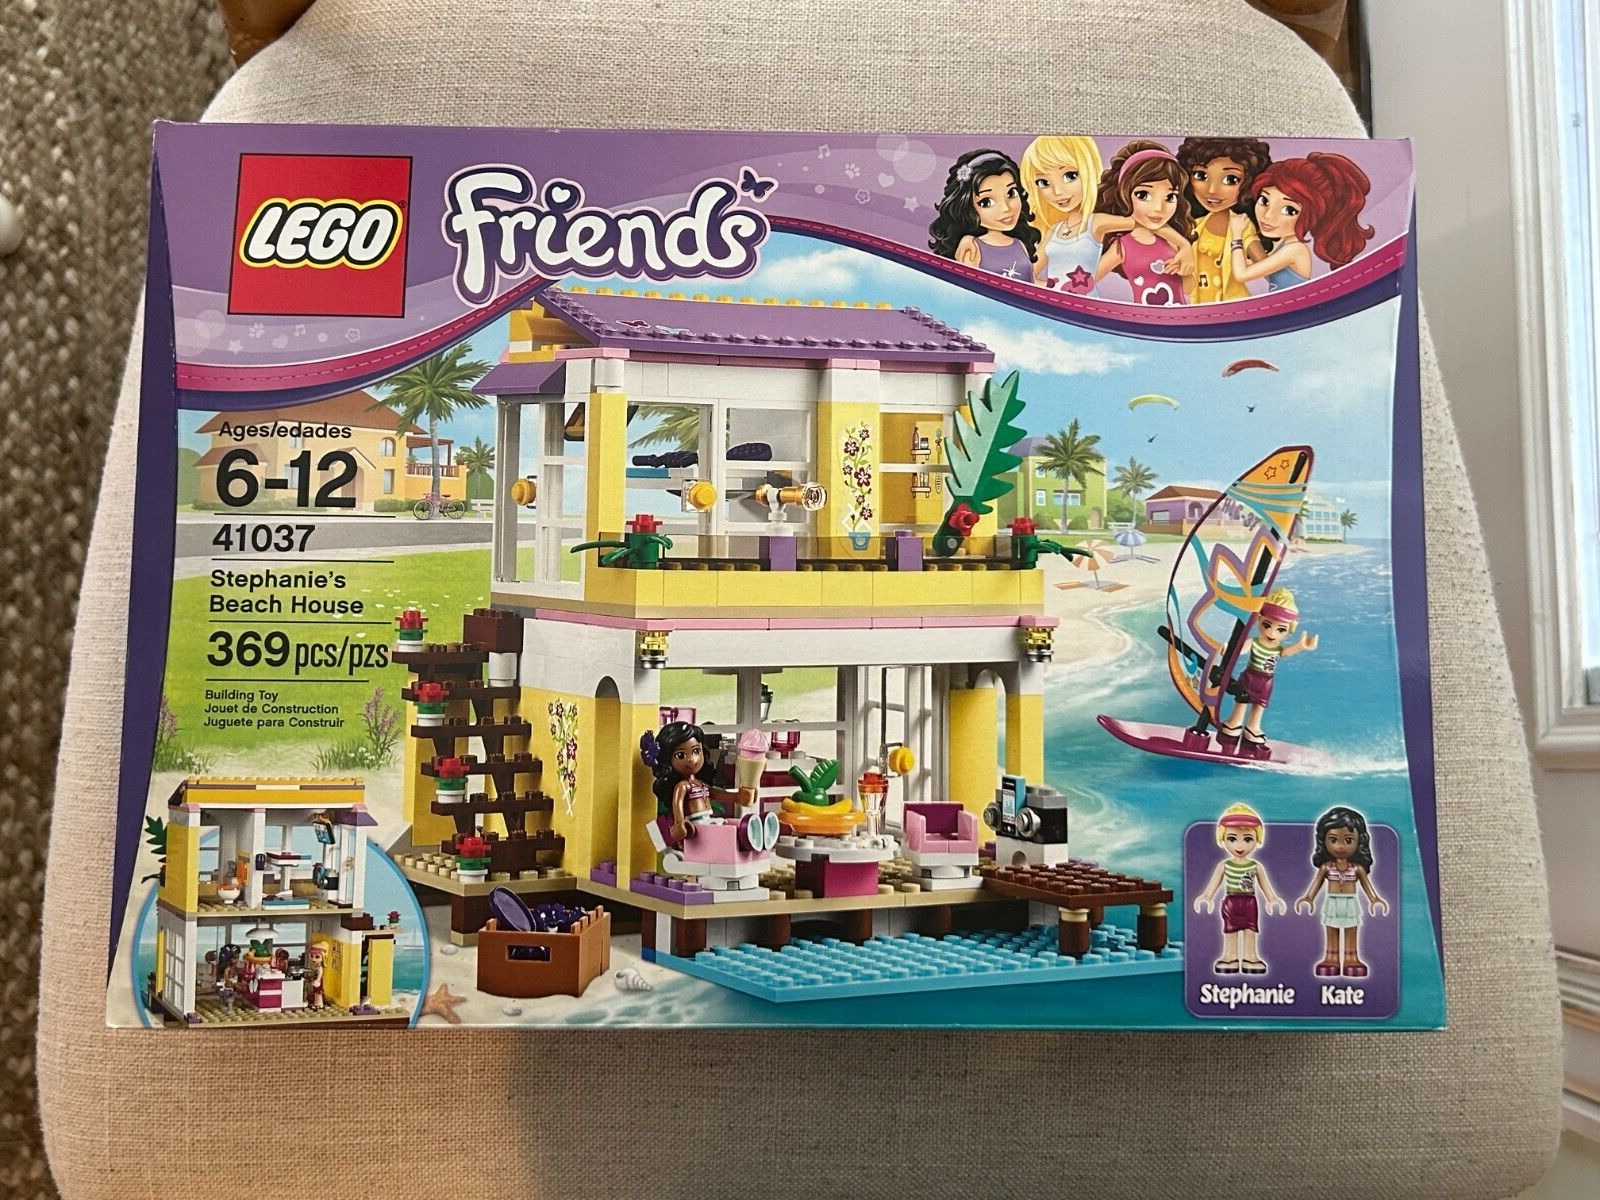 LEGO Friends 41037 Stephanie's Beach House 100% Complete with Box, Instructions